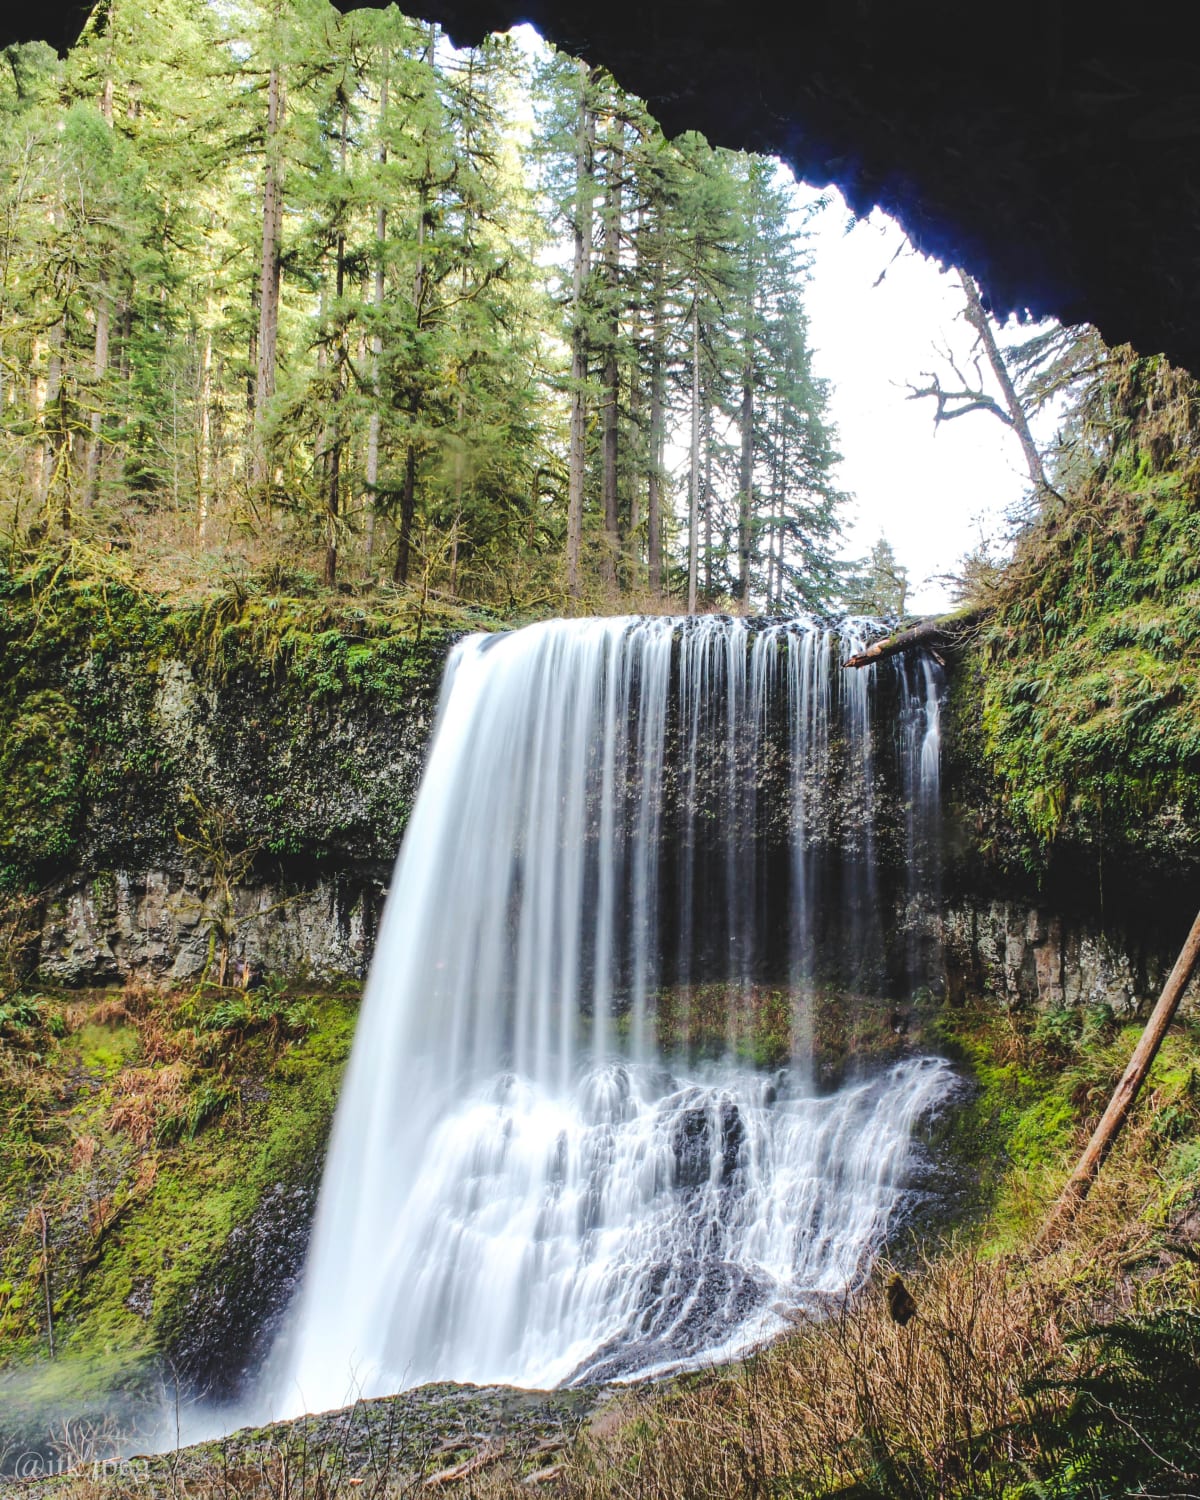 Waterfall viewed from a cave, Silver Falls State Park, Oregon @itk.jpeg